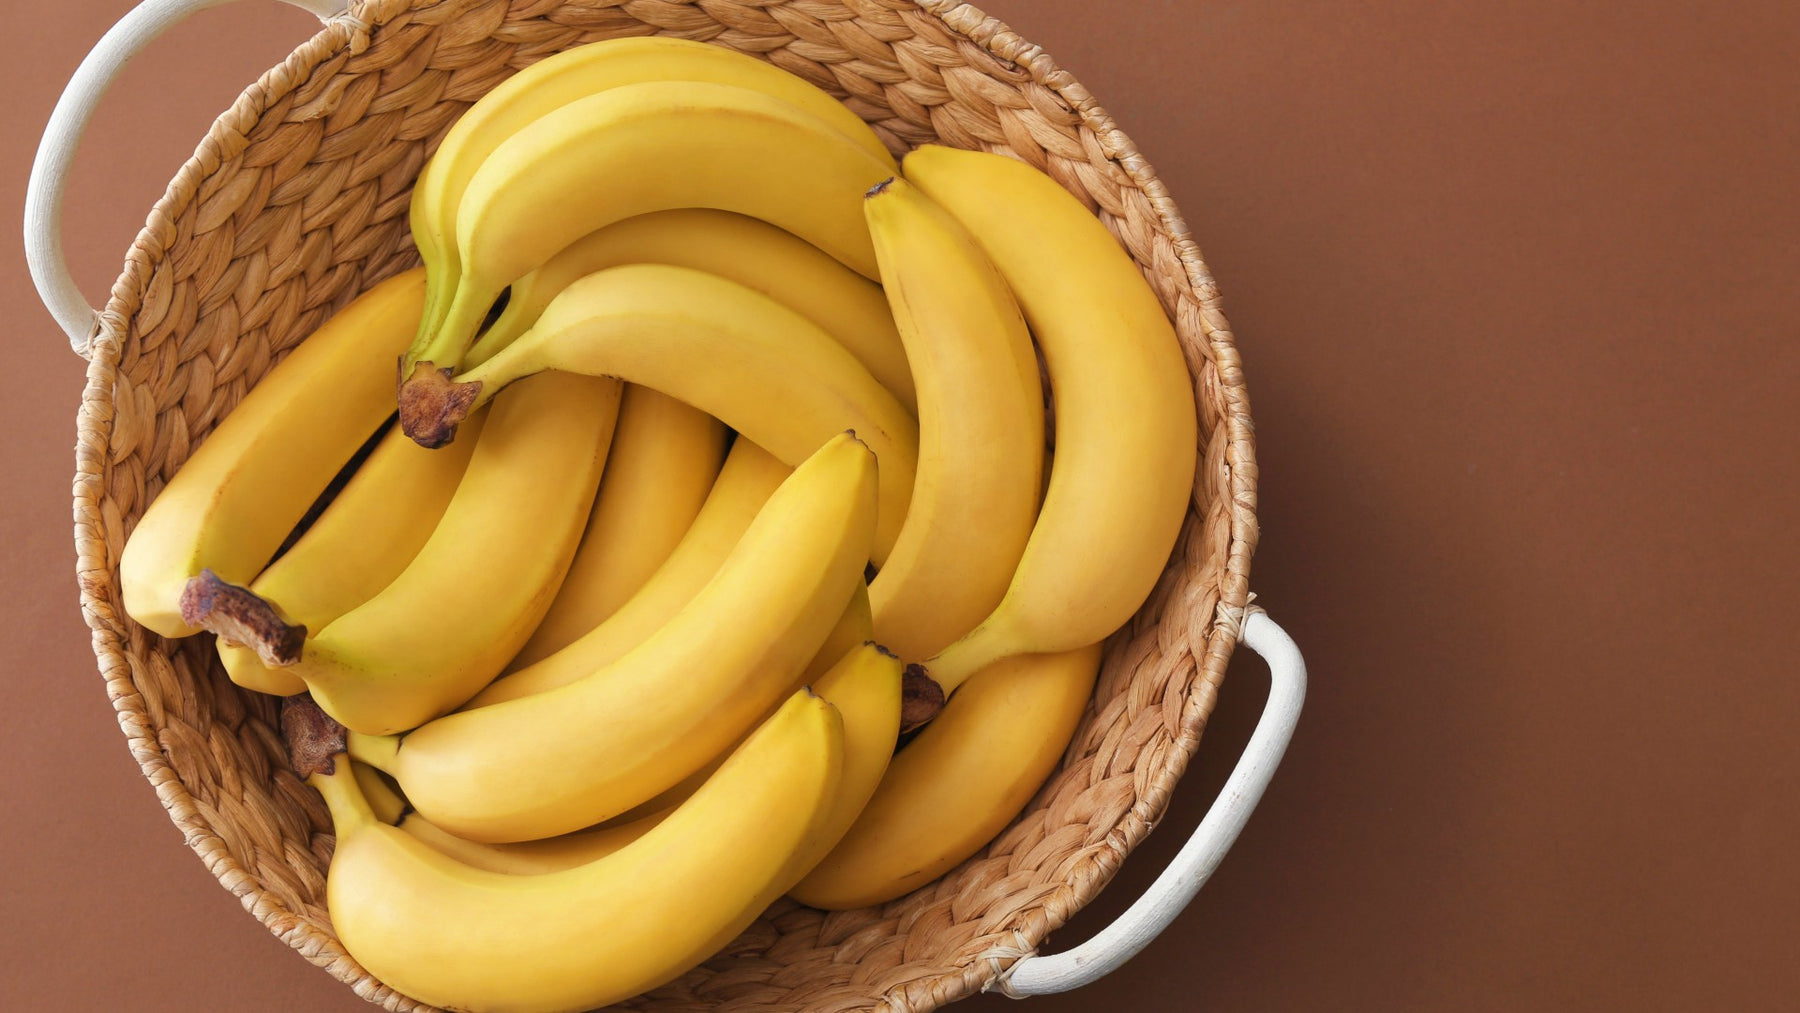 How Many Calories in a Banana?